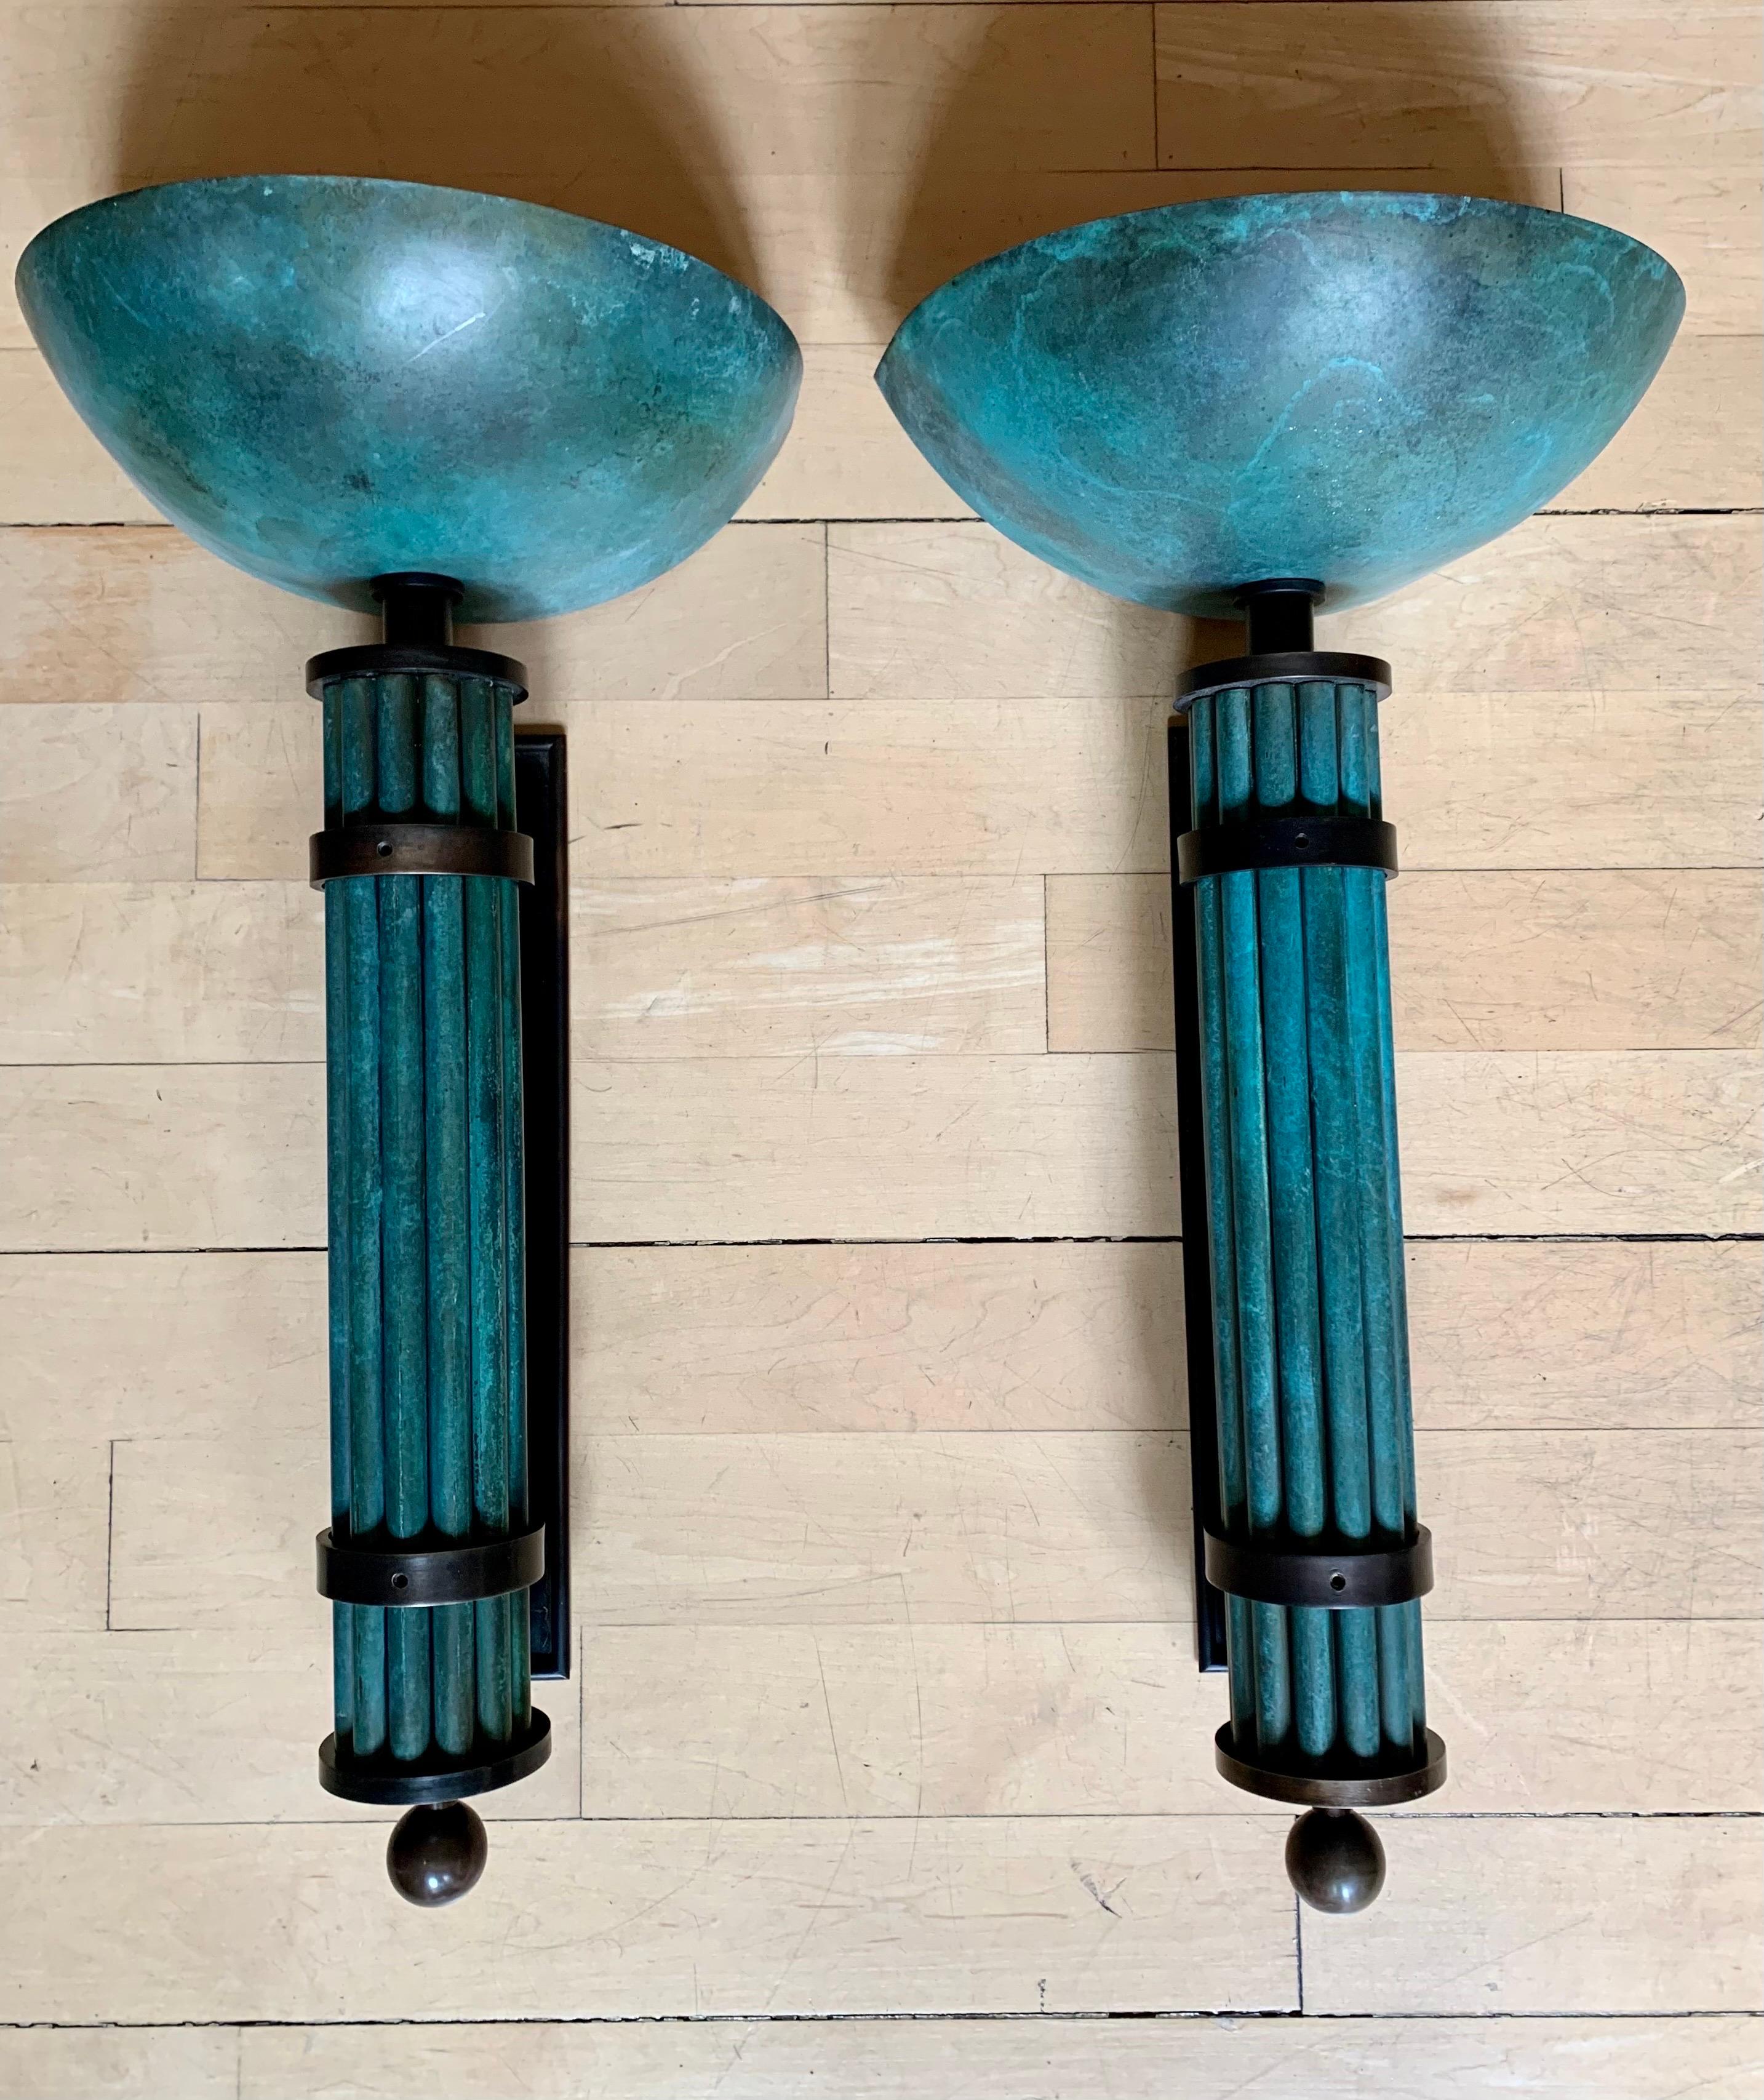 A pair of large wall sconces in Art Deco style, made entirely of bronze, with two techniques, oil-patinated bronze and oxidized-effect bronze, the sconces are supported on a patinated bronze support, in which the sconces are hooked. These are made